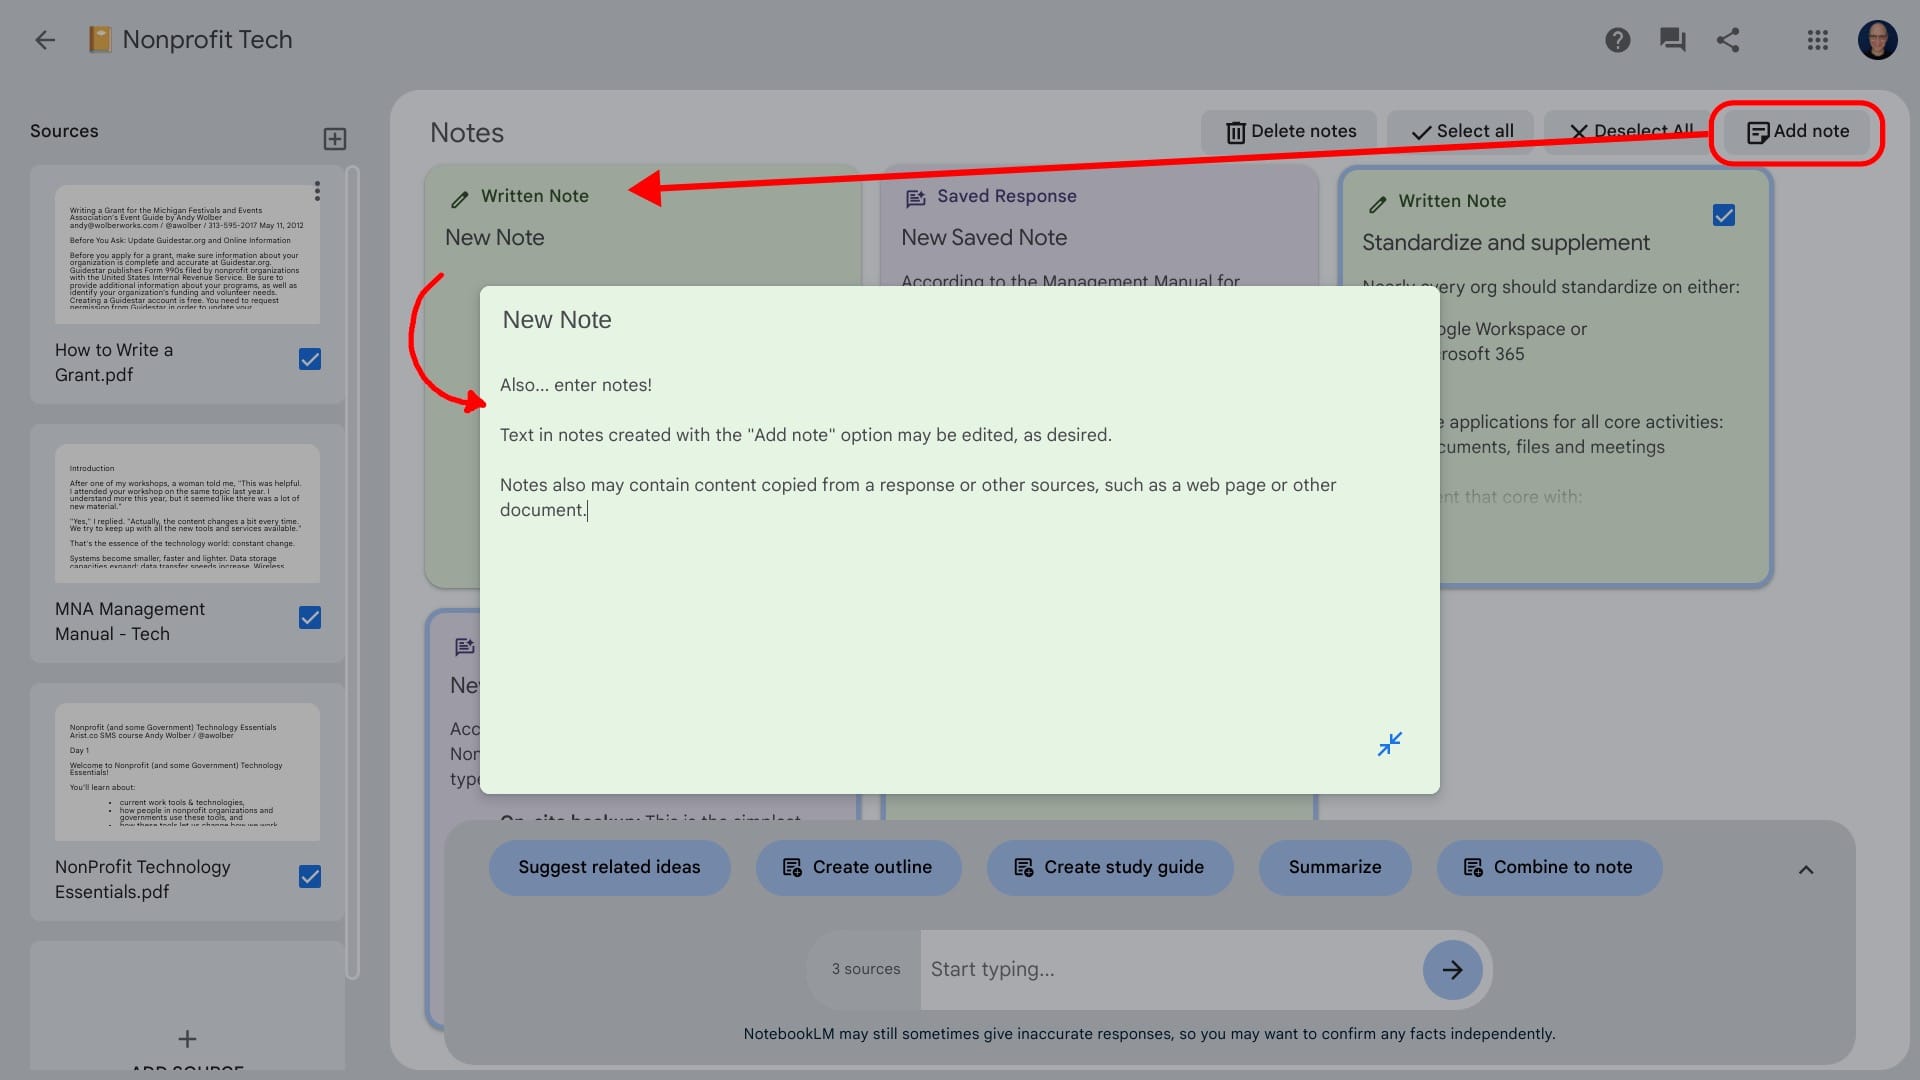 Screenshot of Add note button (upper right area) circled, with an arrow showing a blank New Note created, then with some text entered into the note on-screen.